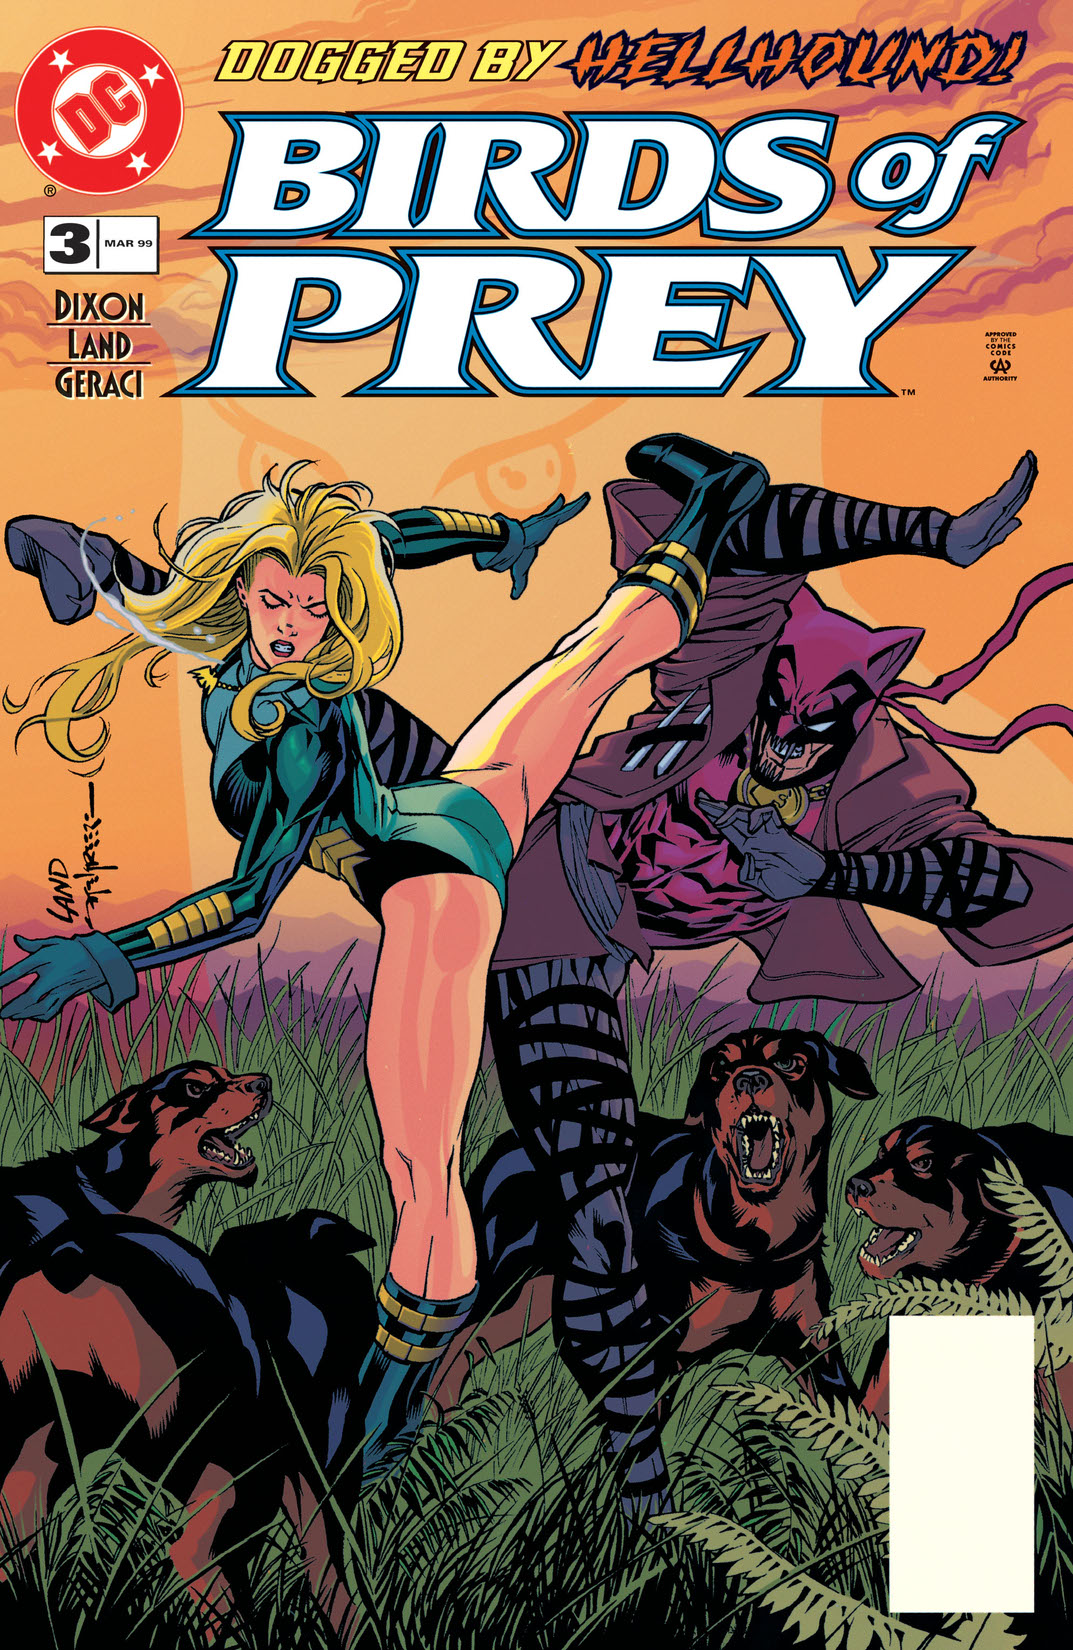 Birds of Prey (1998-) #3 preview images